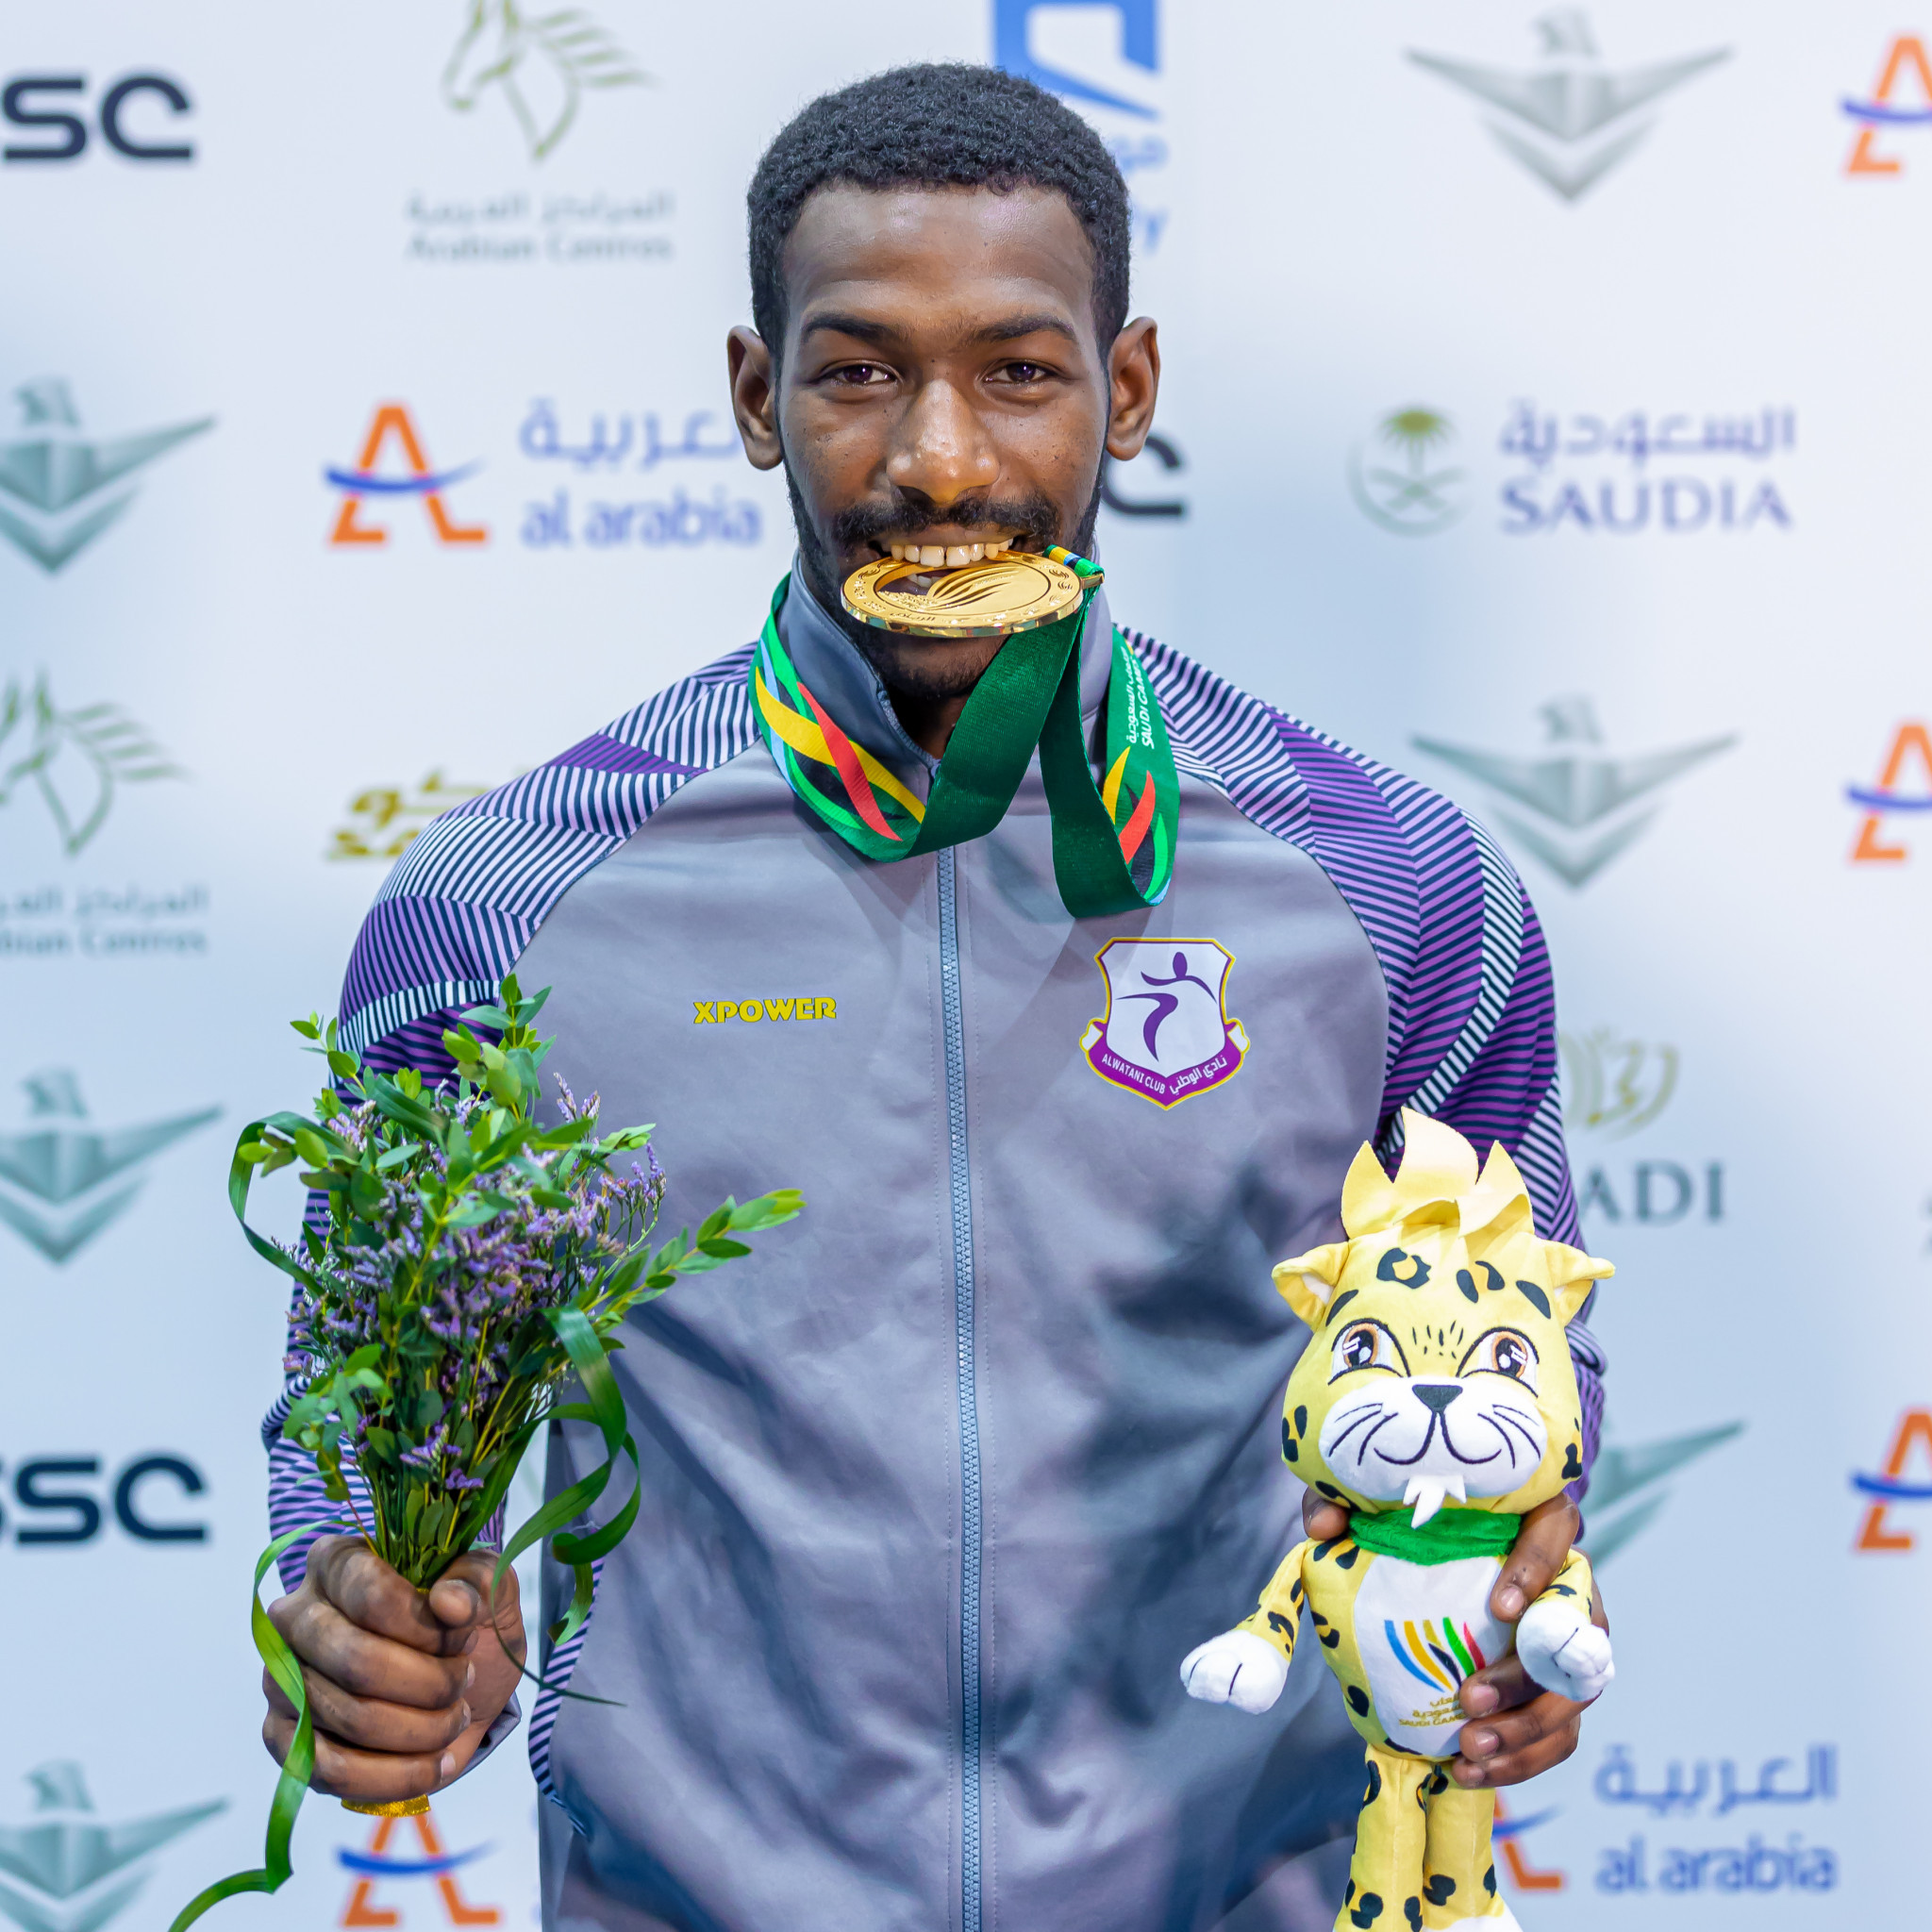 Saad Mohammed Al-Baqmi achieved gold in the men's sabre individual division ©Saudi Games